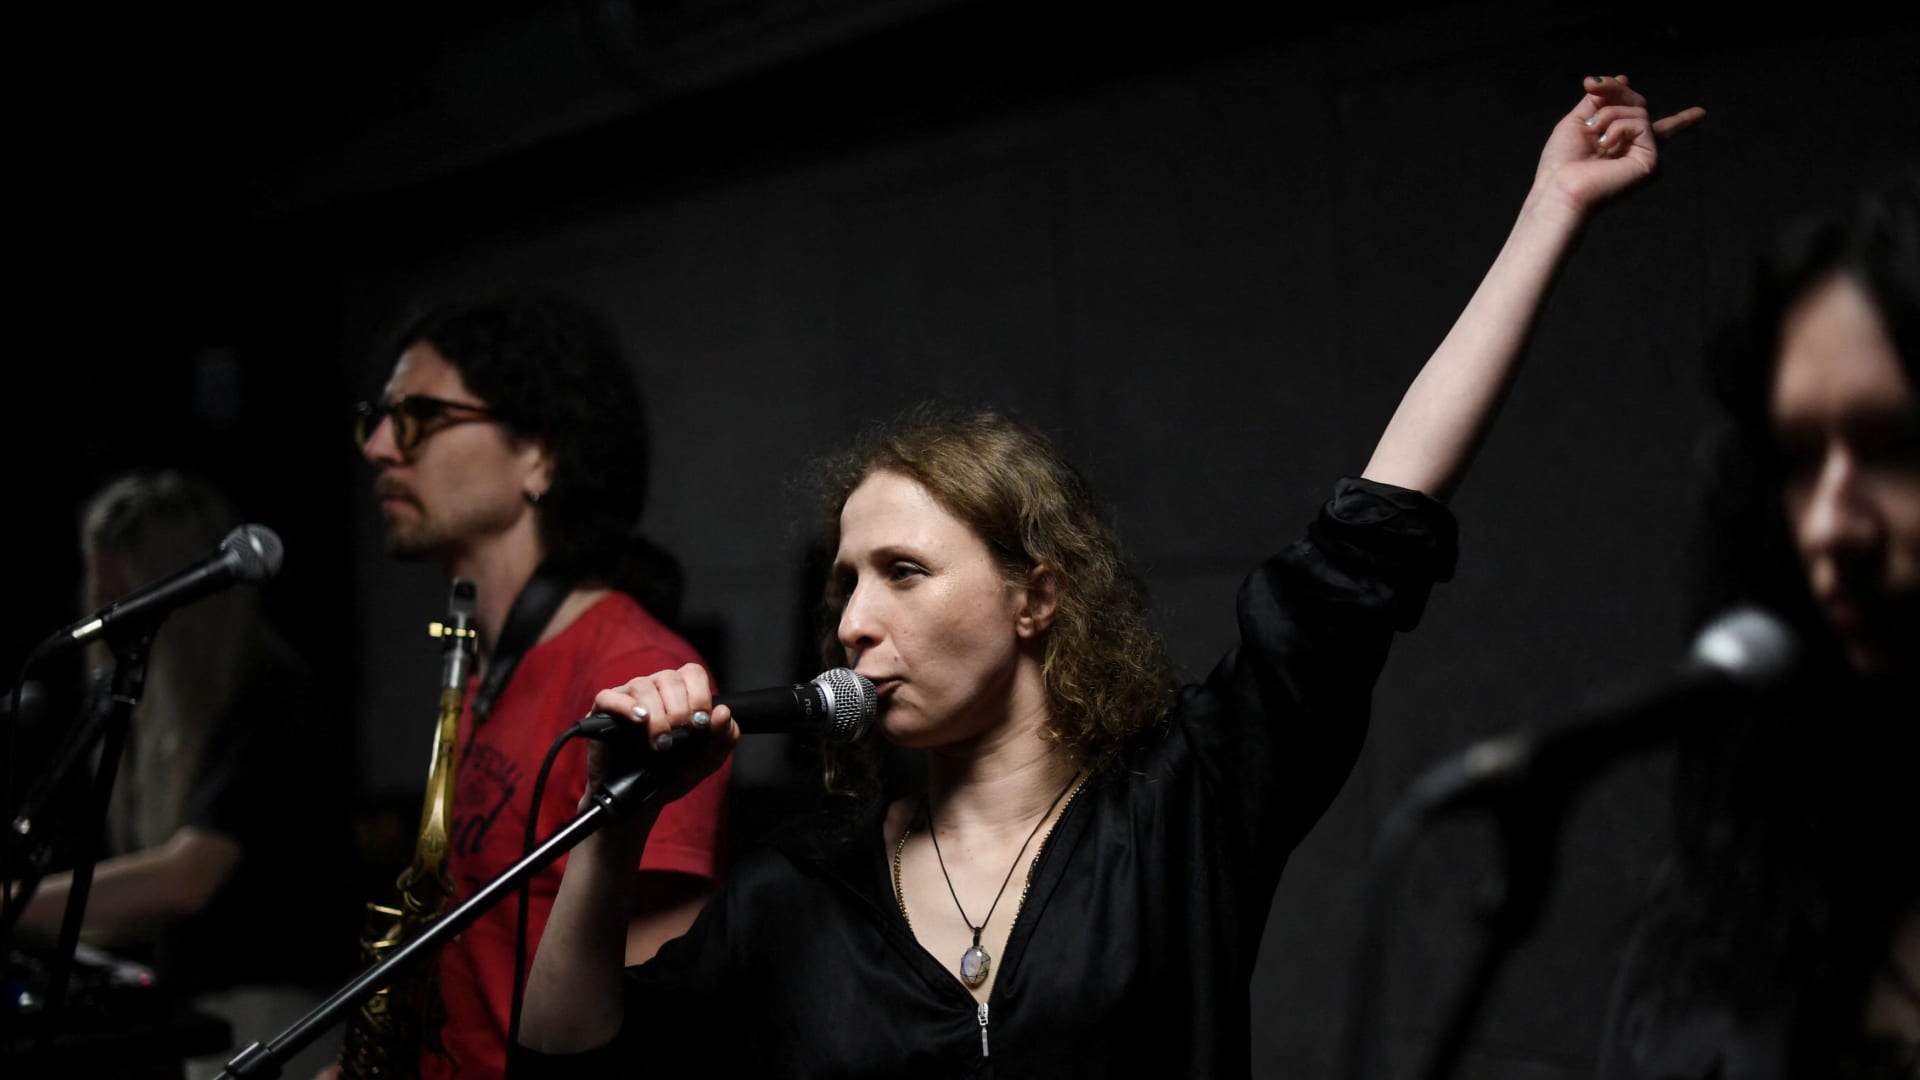 Russia's regime critical punk music group Pussy Riot member Maria Alyokhina performs with band members during a rehearsal, after she escaped a house arrest in Russia, in Berlin, Germany May 11, 2022. 